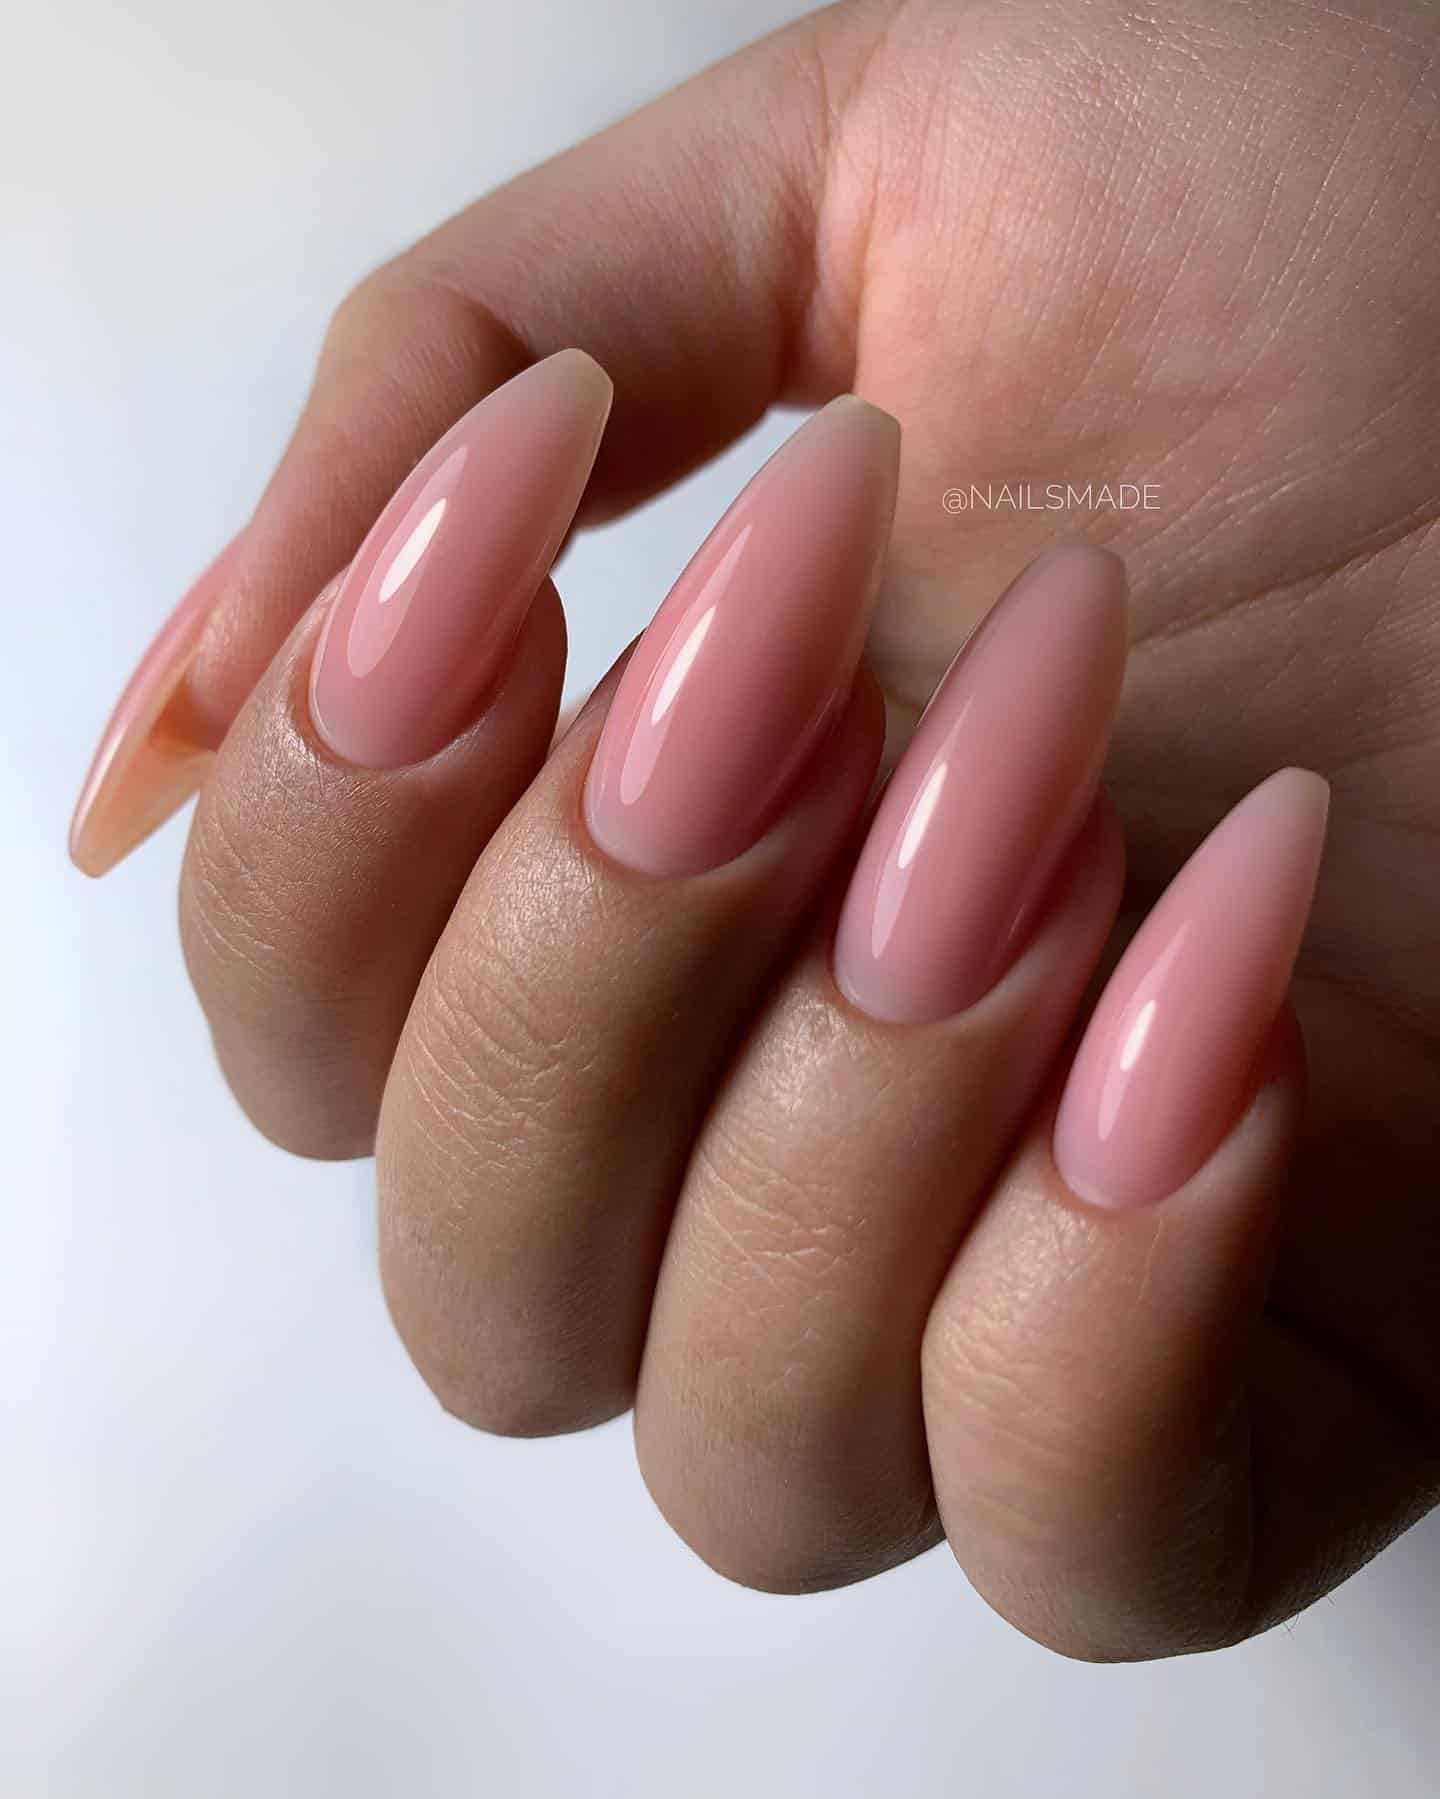 A hand with long coffin nails painted a glossy nude pink